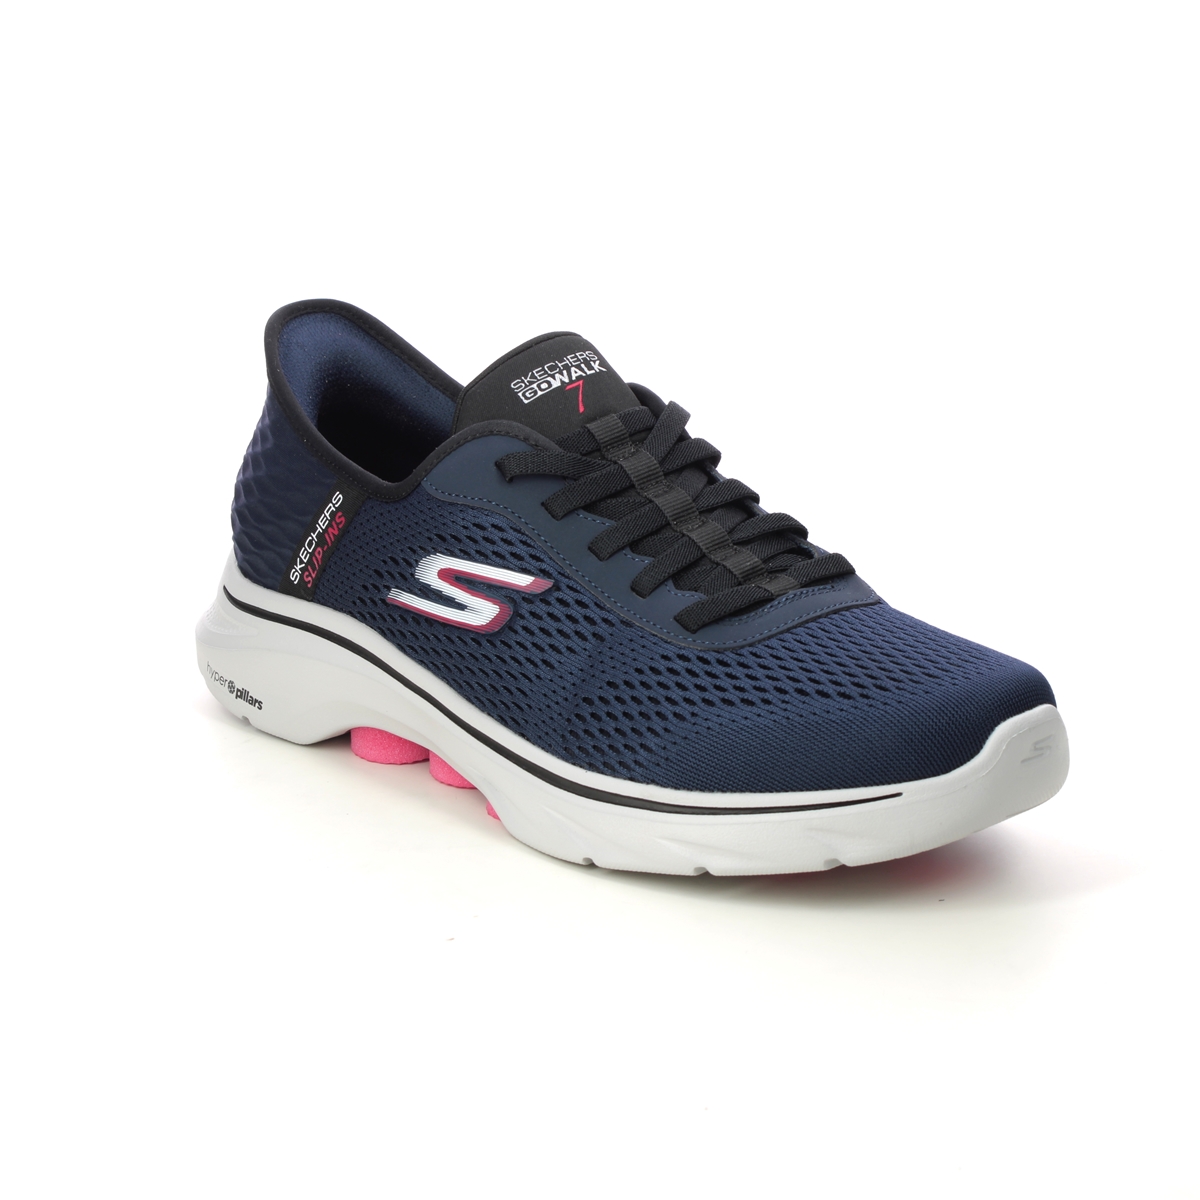 Skechers Slip Ins Go Walk 7 Bungee NVRD Navy Red Mens trainers 216648 in a Plain Textile in Size 10